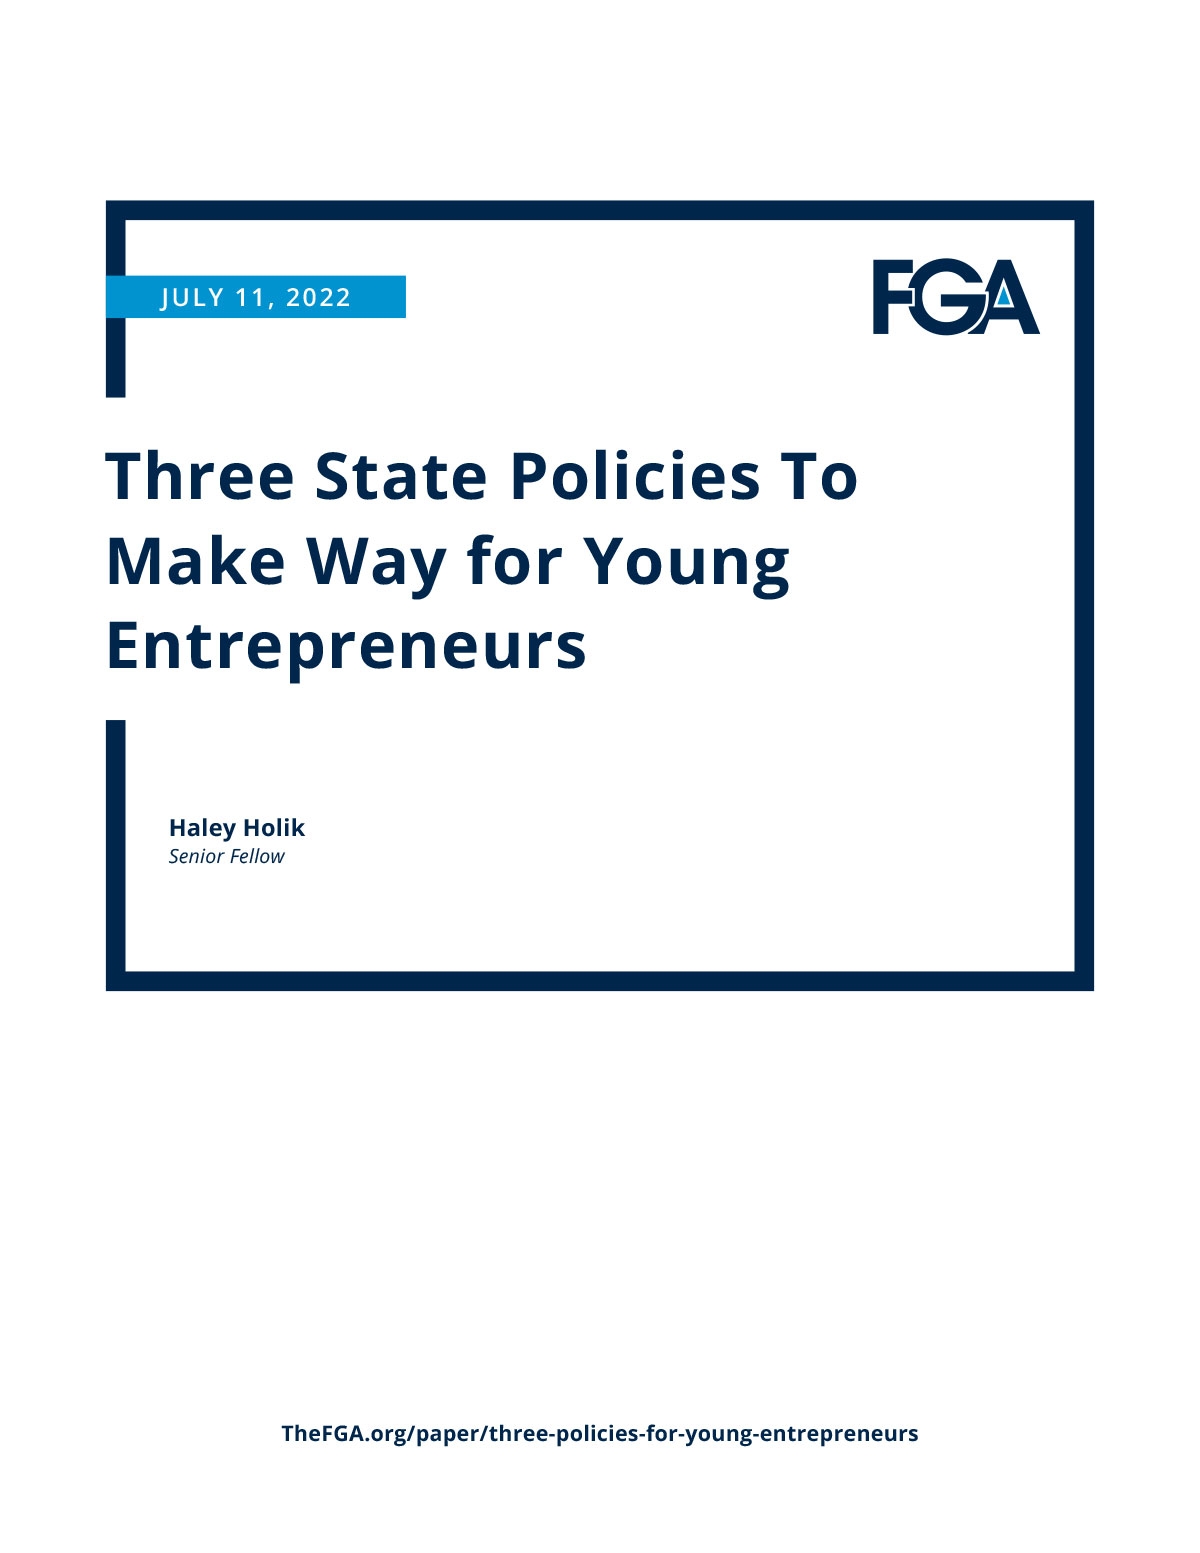 Three State Policies to Make Way for Young Entrepreneurs